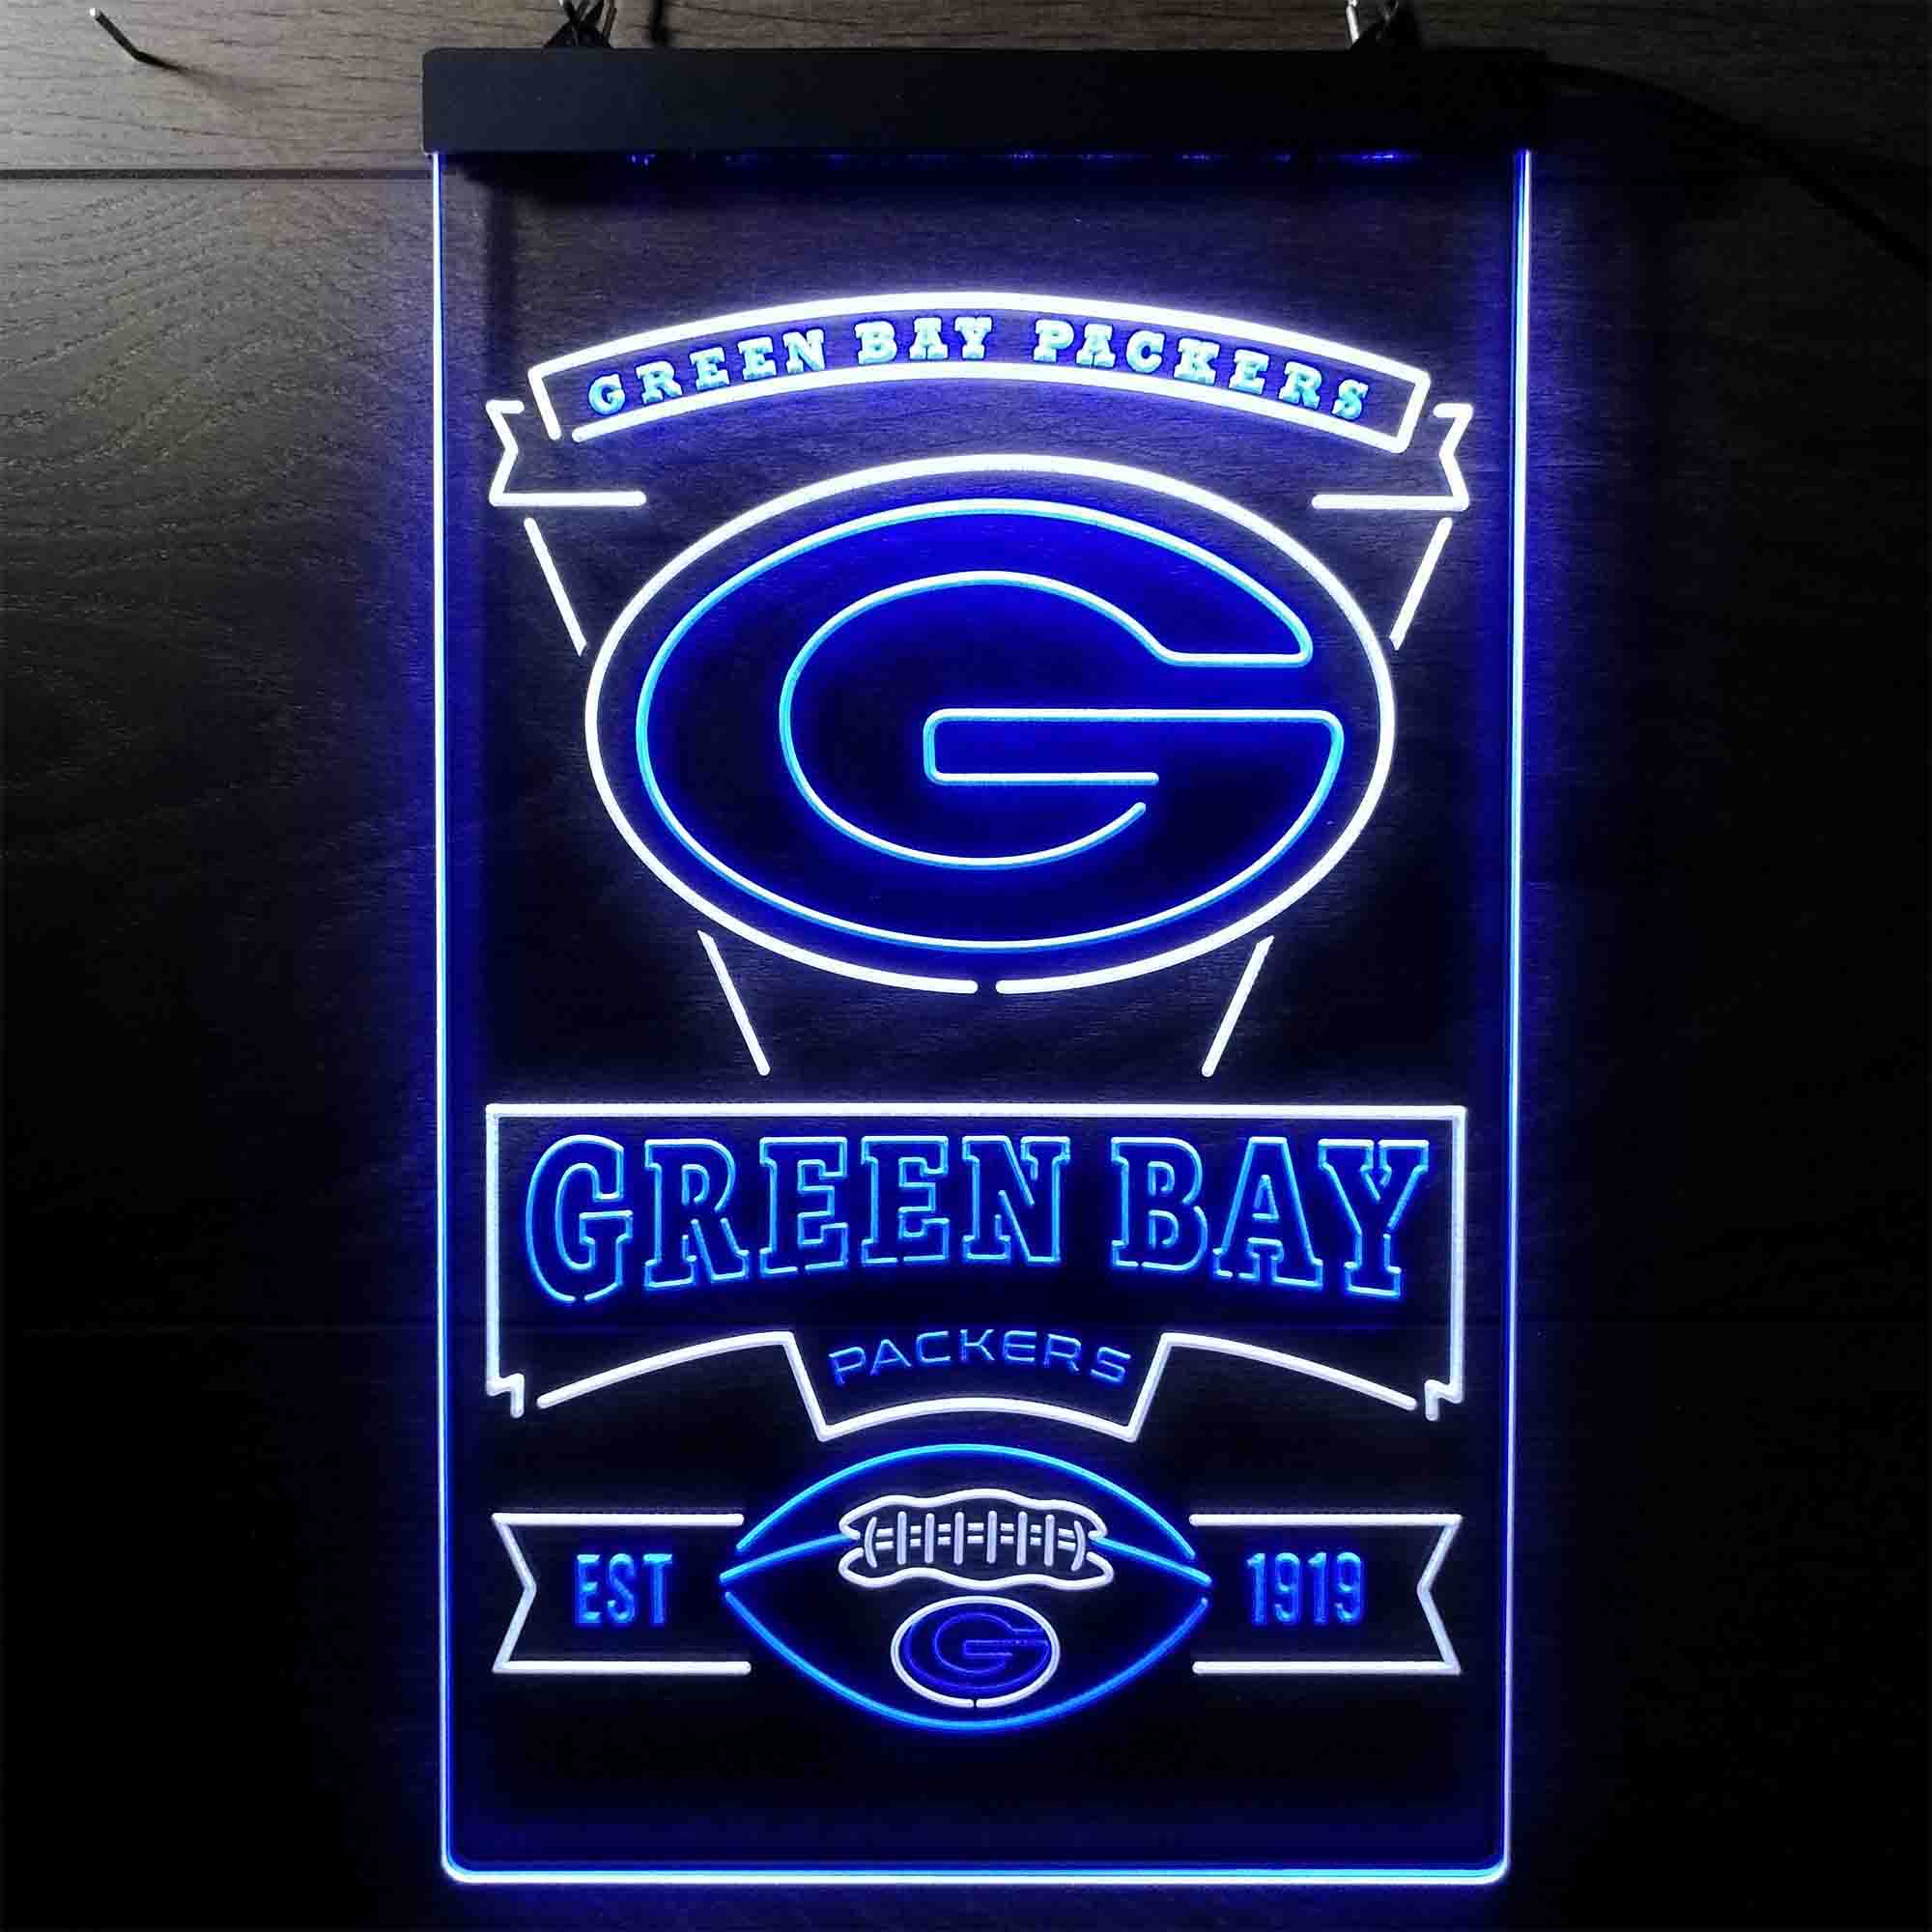 Green Bay Packers Est. 1919 LED Neon Sign